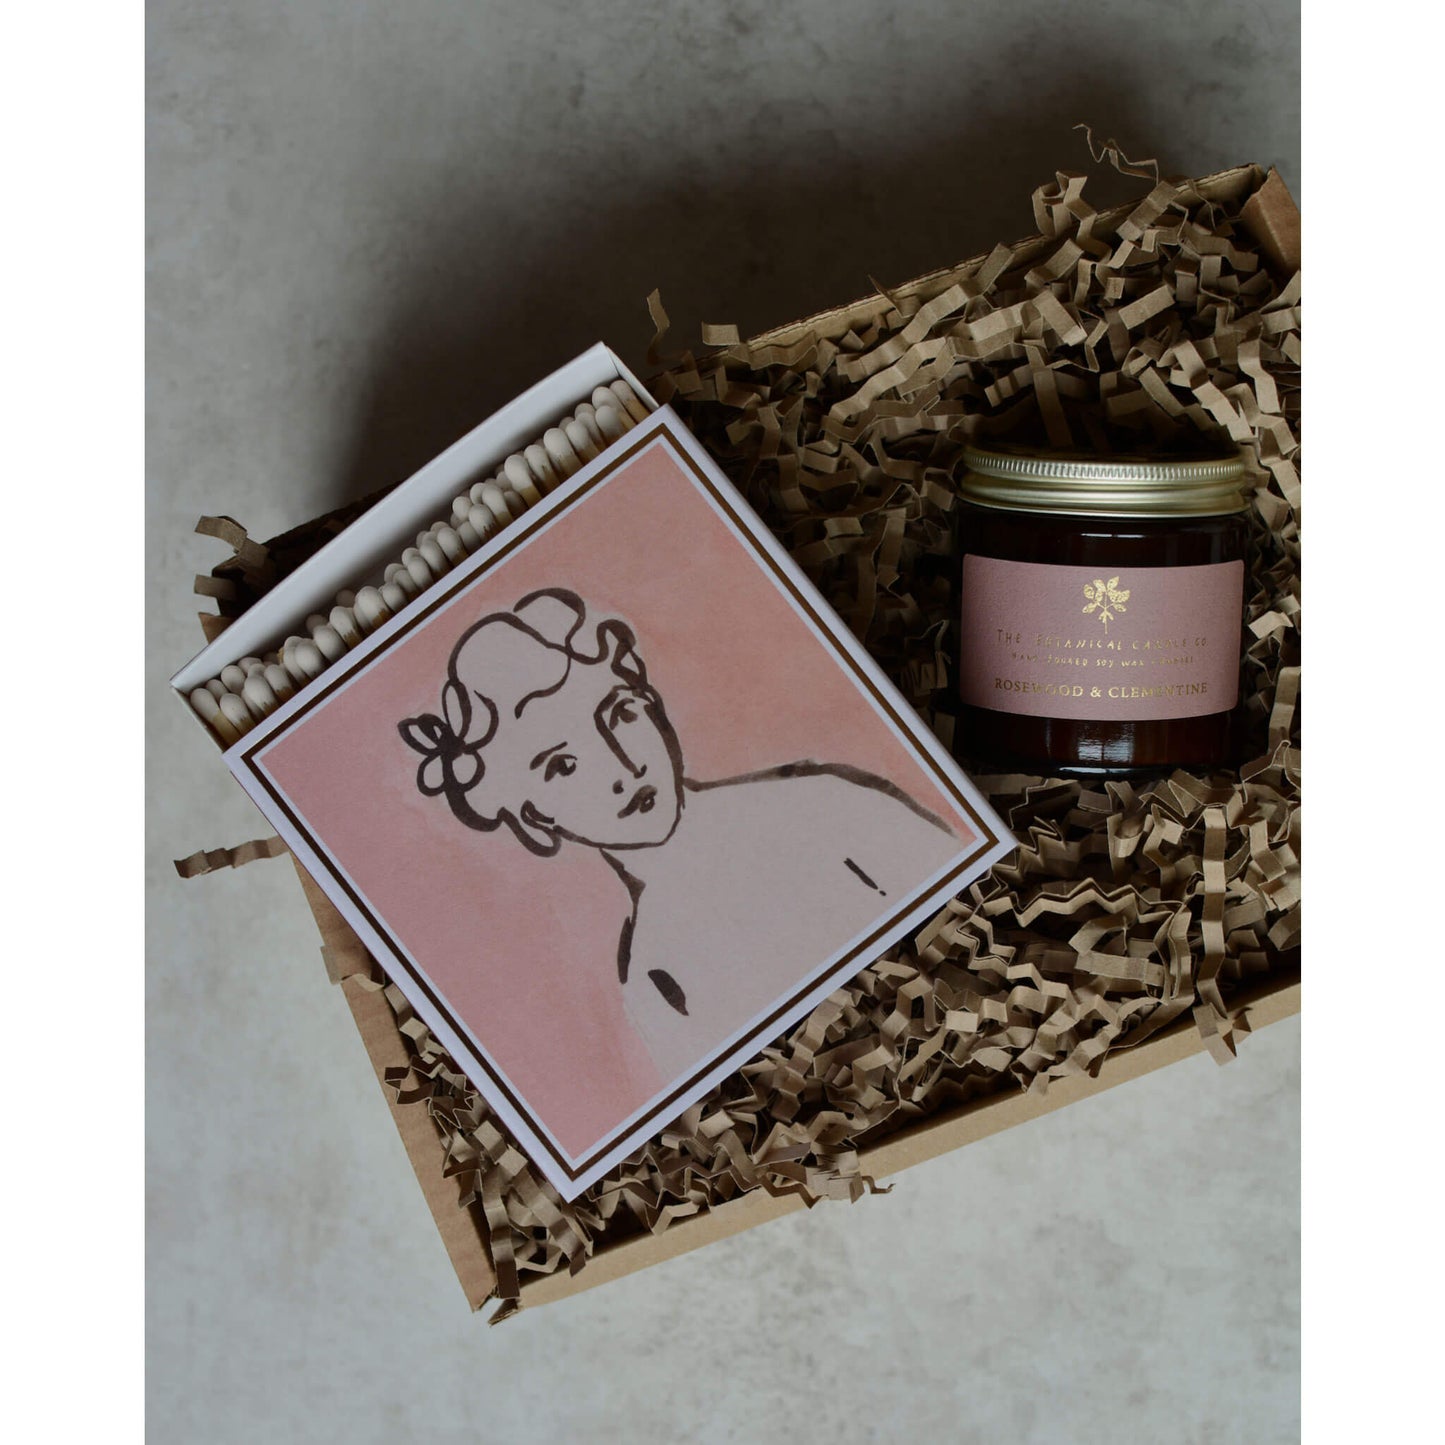 Rosewood & Clementine Soy Wax Scented Candle